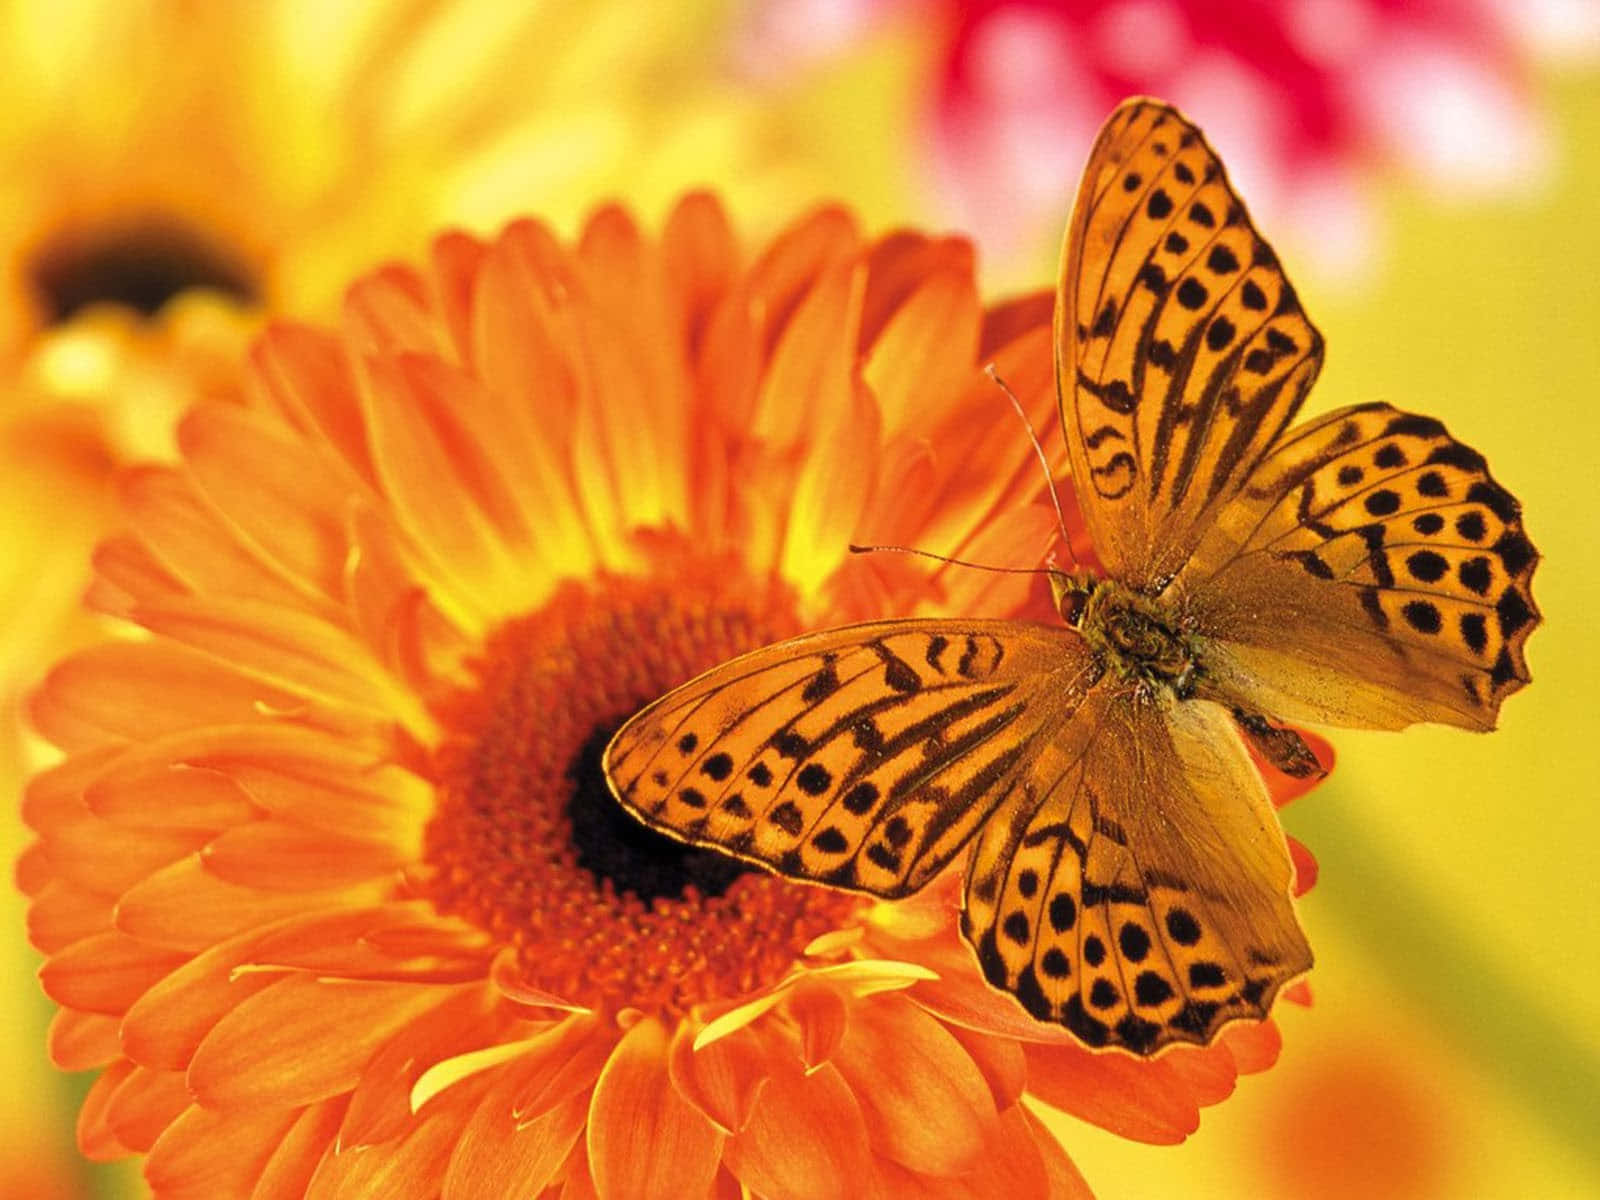 Enjoy a peaceful day of butterfly watching Wallpaper